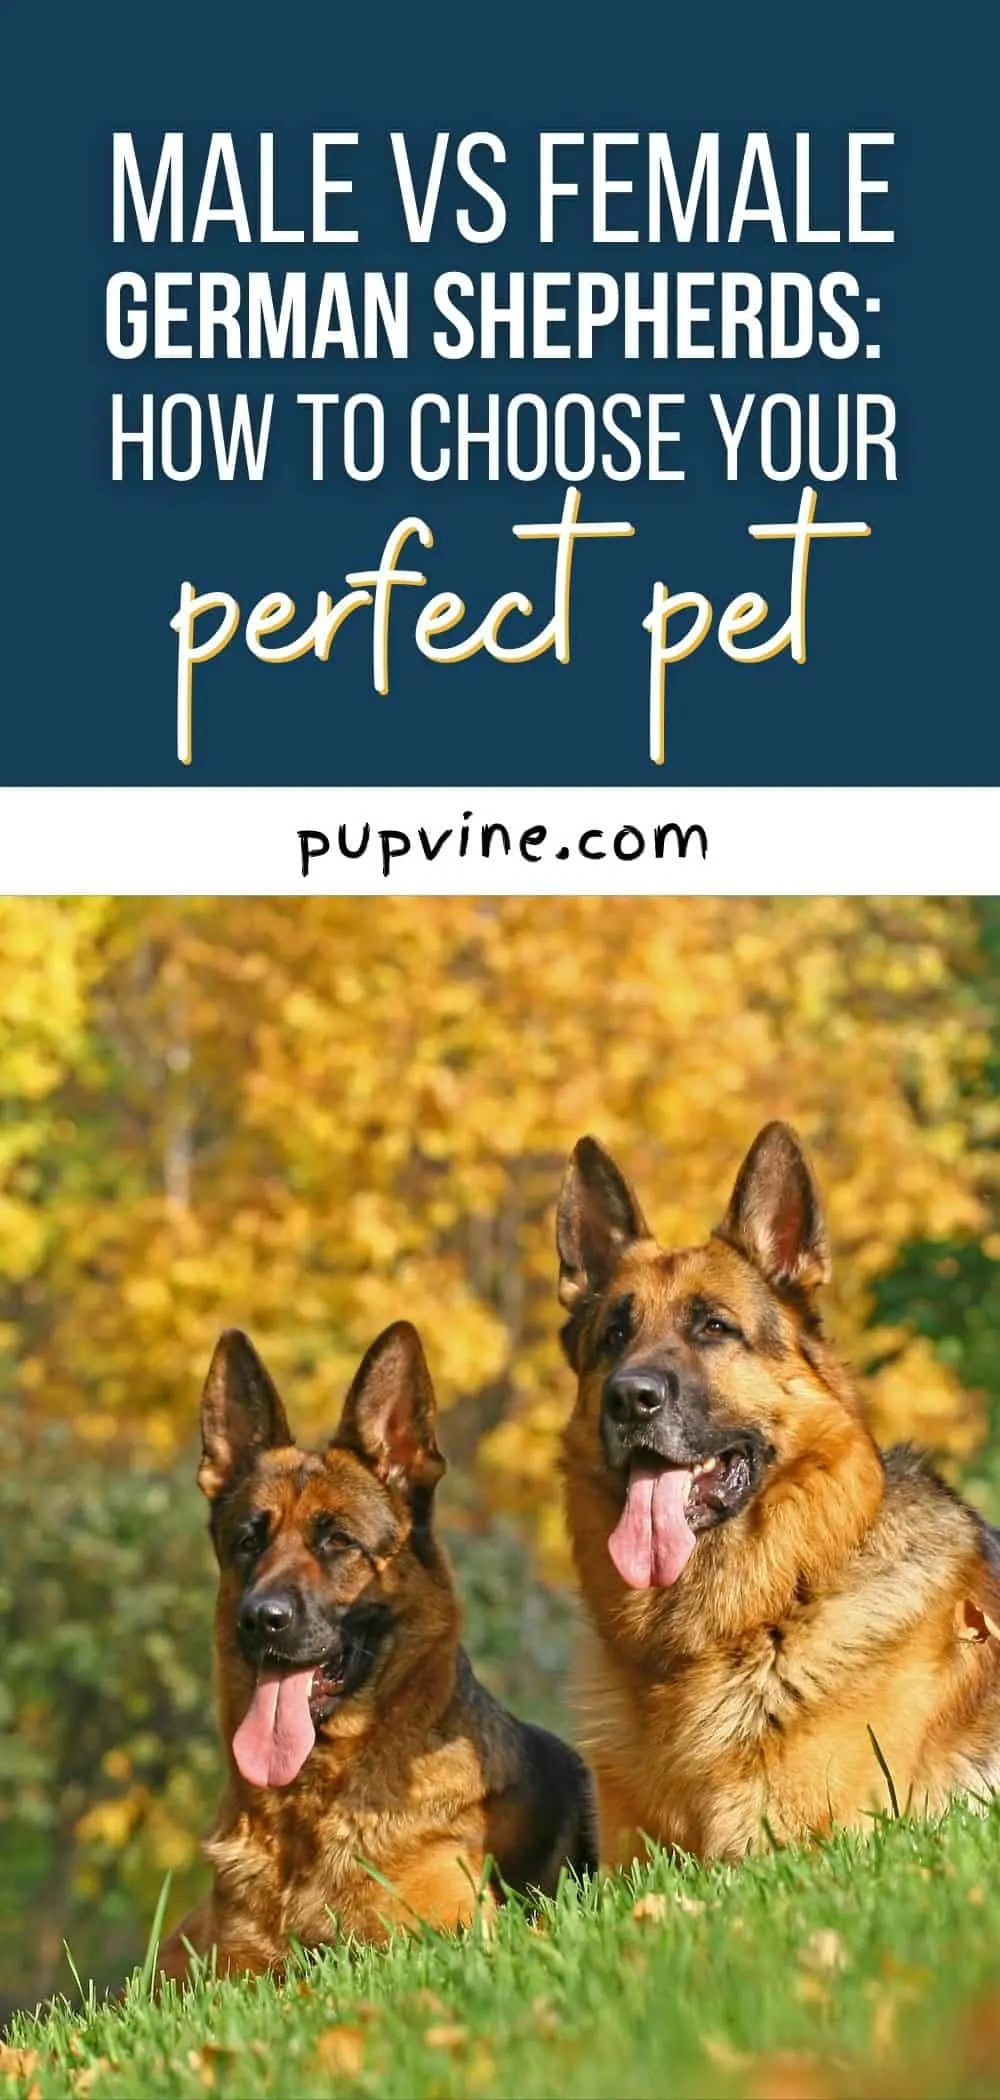 Male vs Female German Shepherds: How to Choose Your Perfect Pet